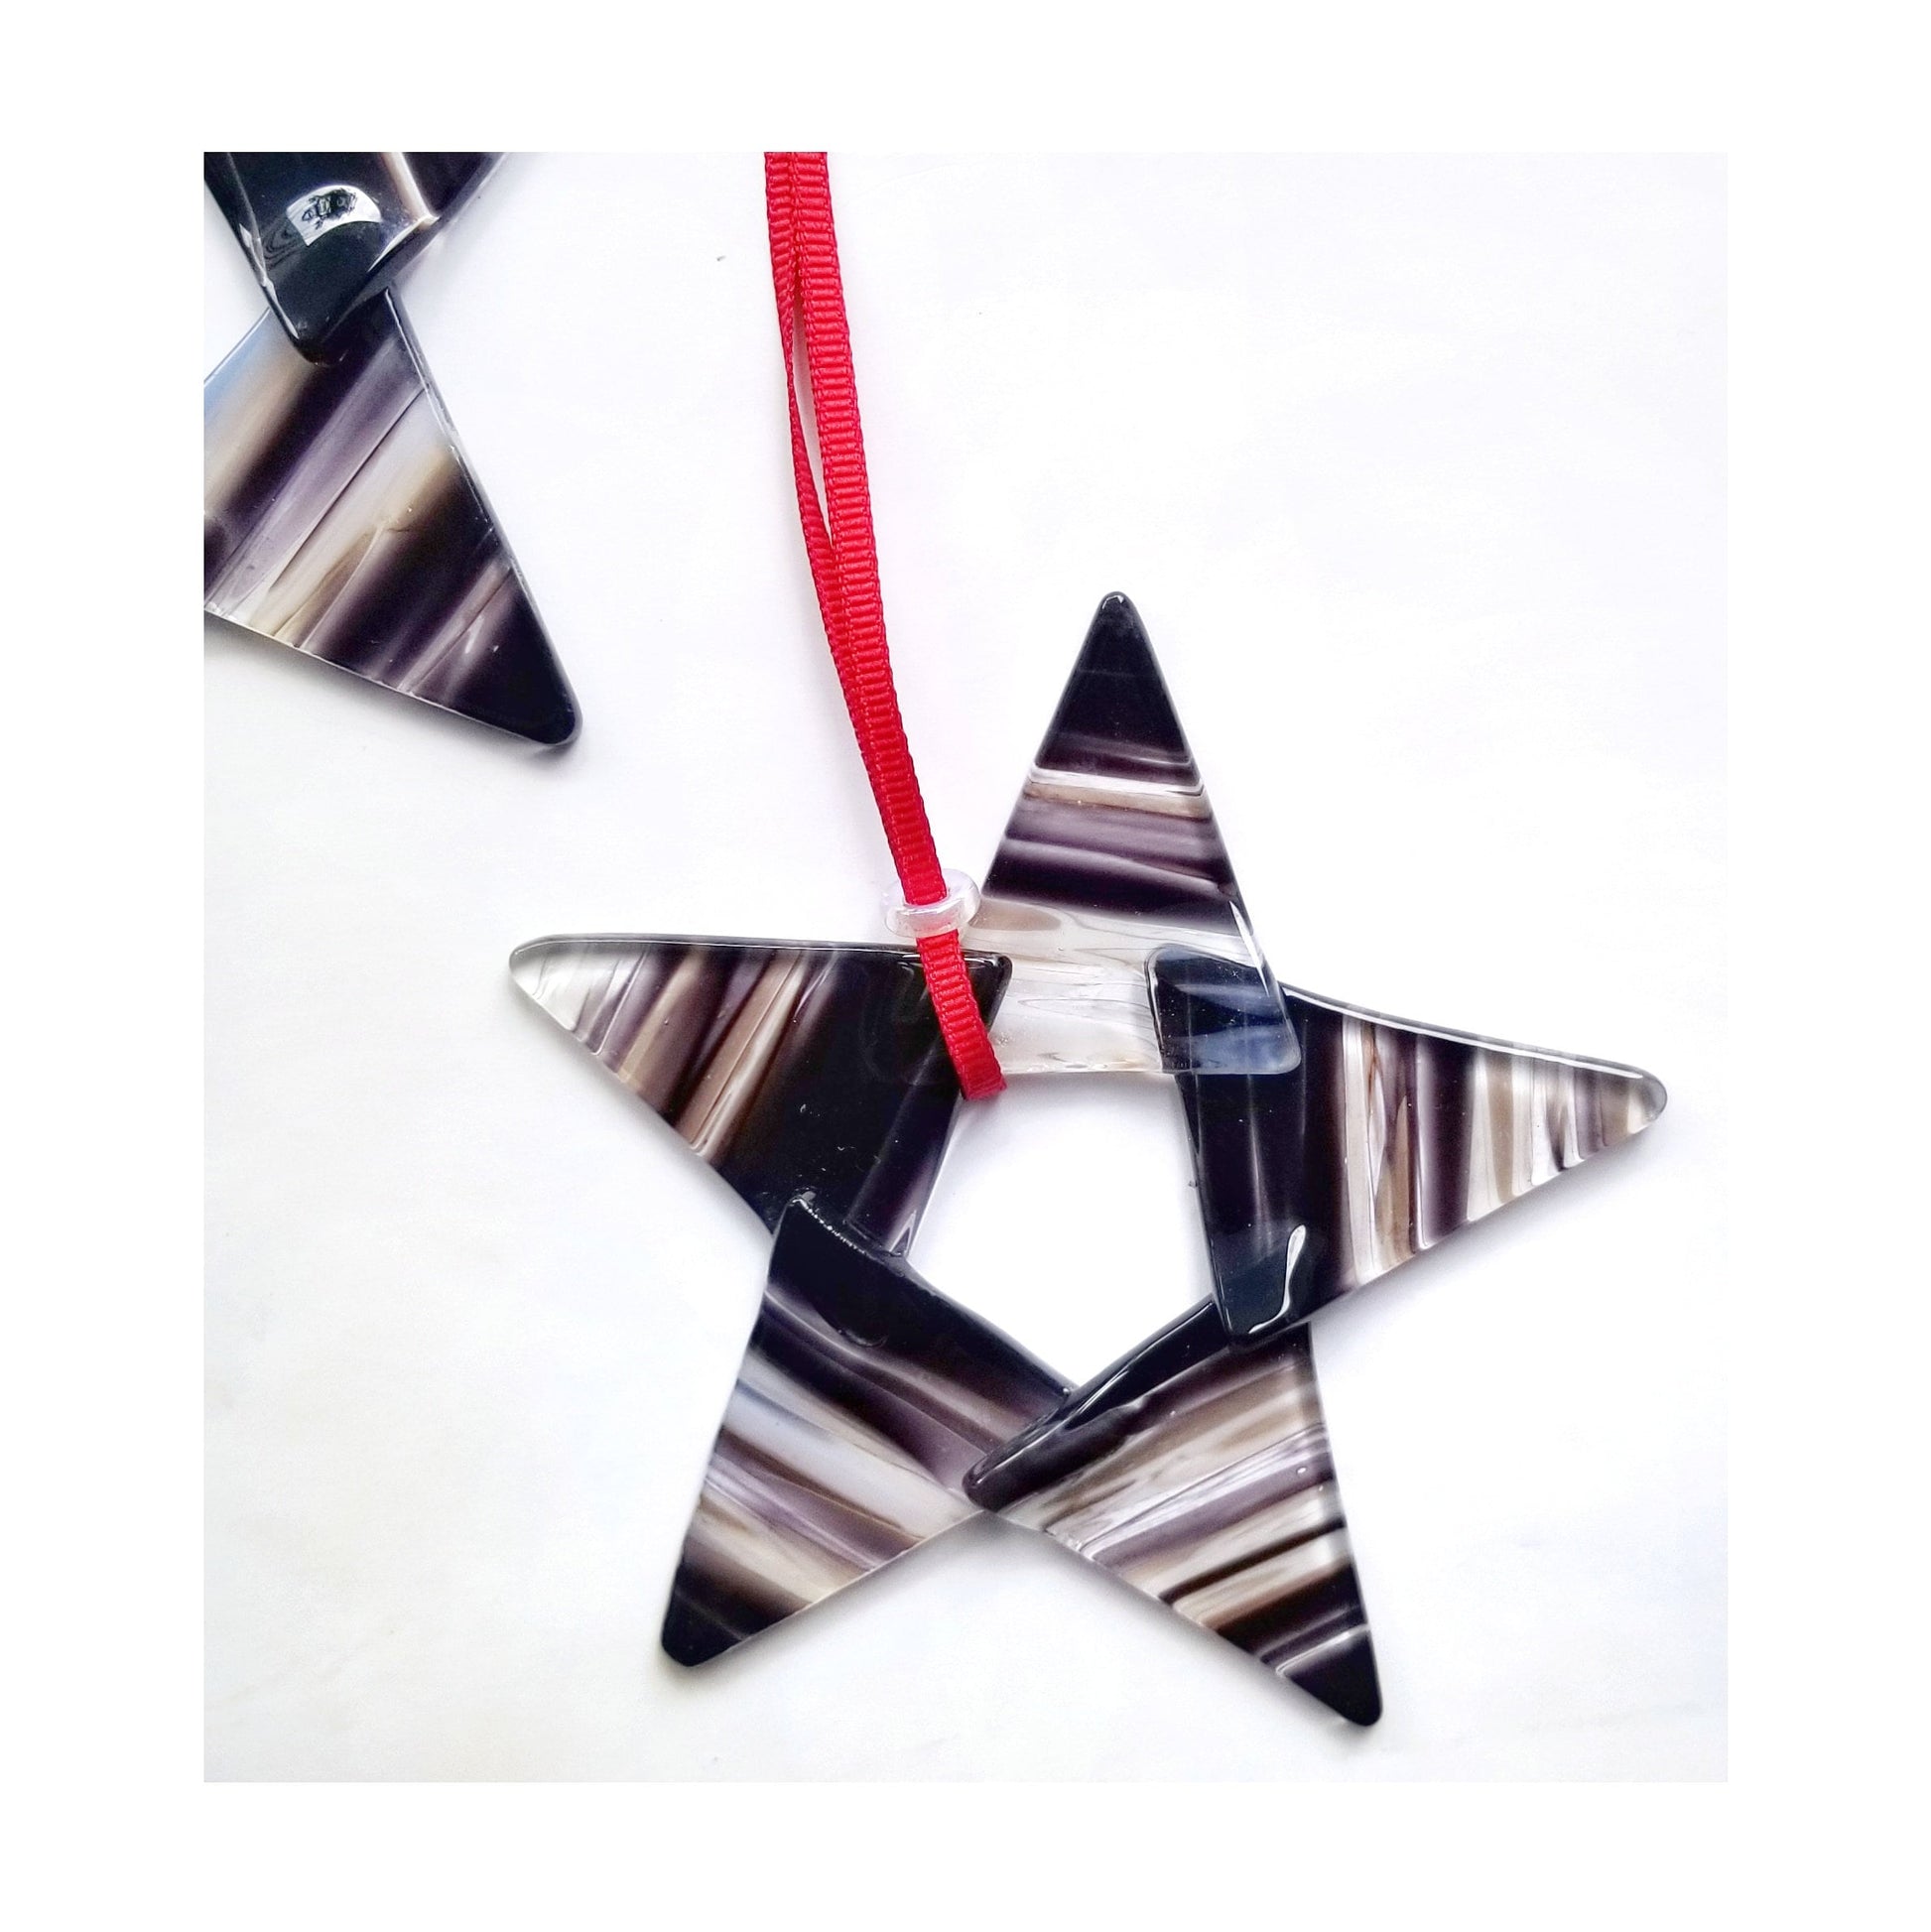 Fused Glass Star Suncatcher. Black & White Christmas Theme. Mantle Decor, Window Hanging Ornament. Gift boxed, shipped free.